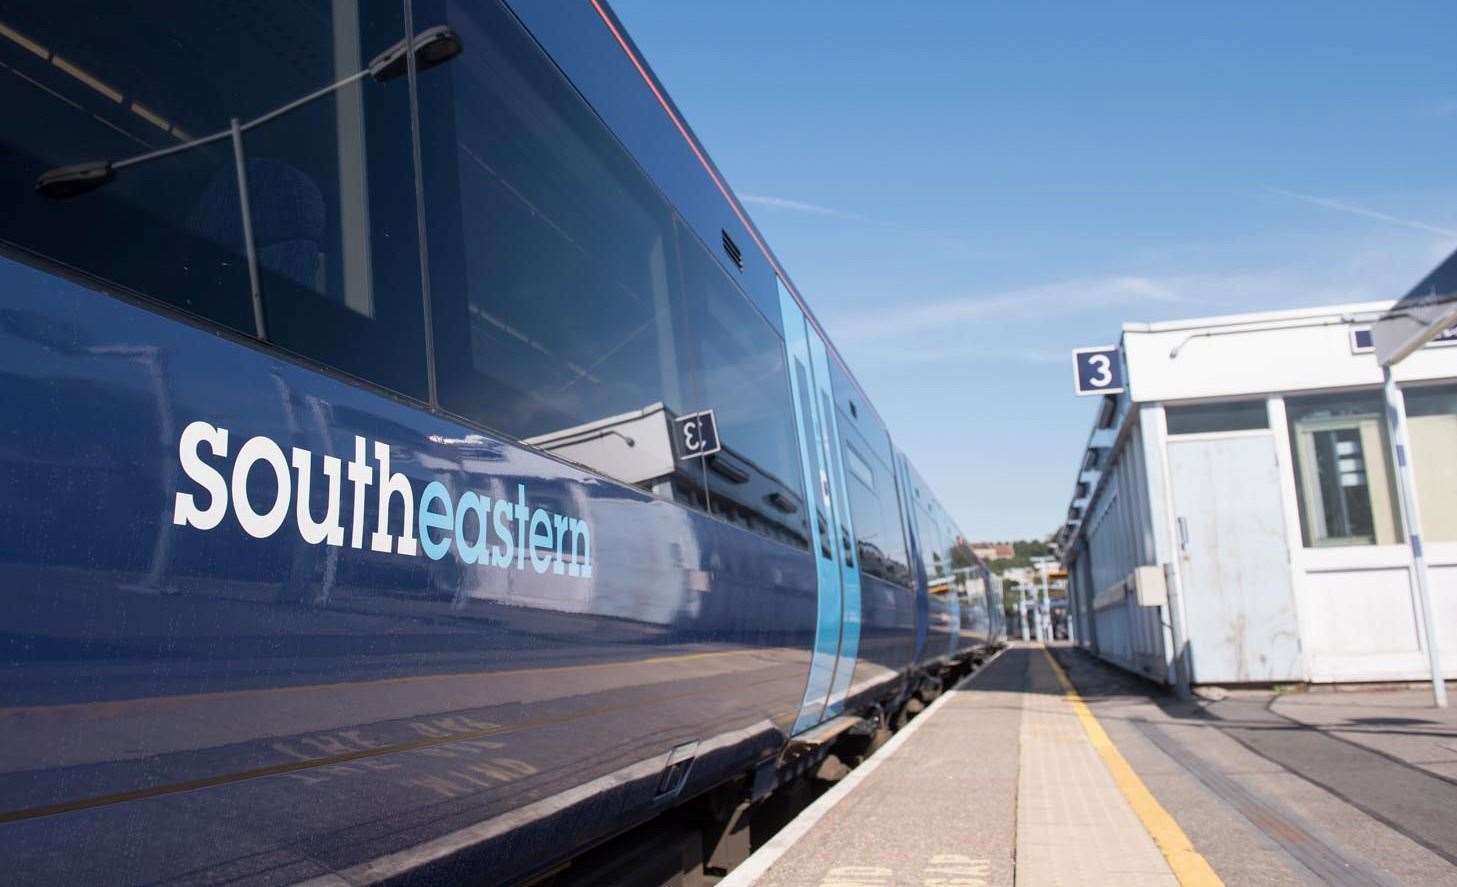 Southeastern services will be affected due to strike action in July